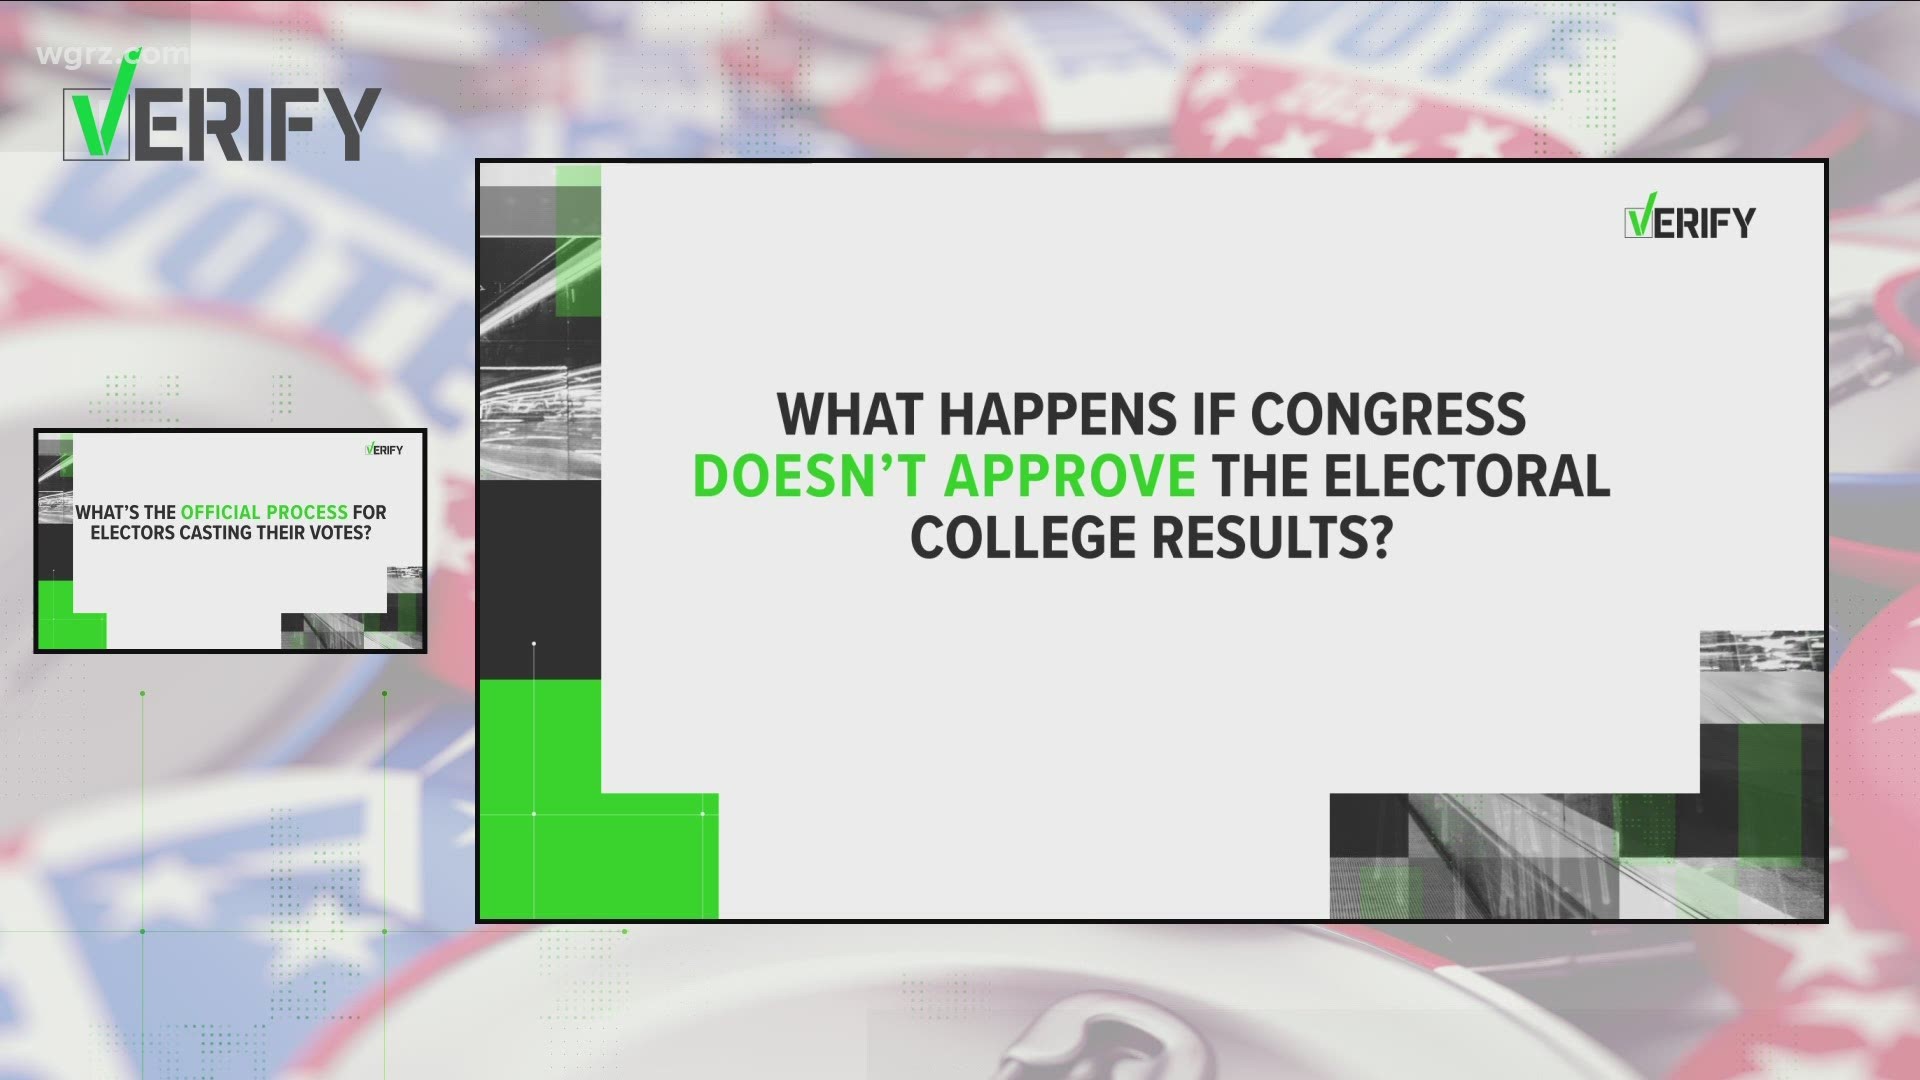 Our verify team looks into your questions about the electoral college